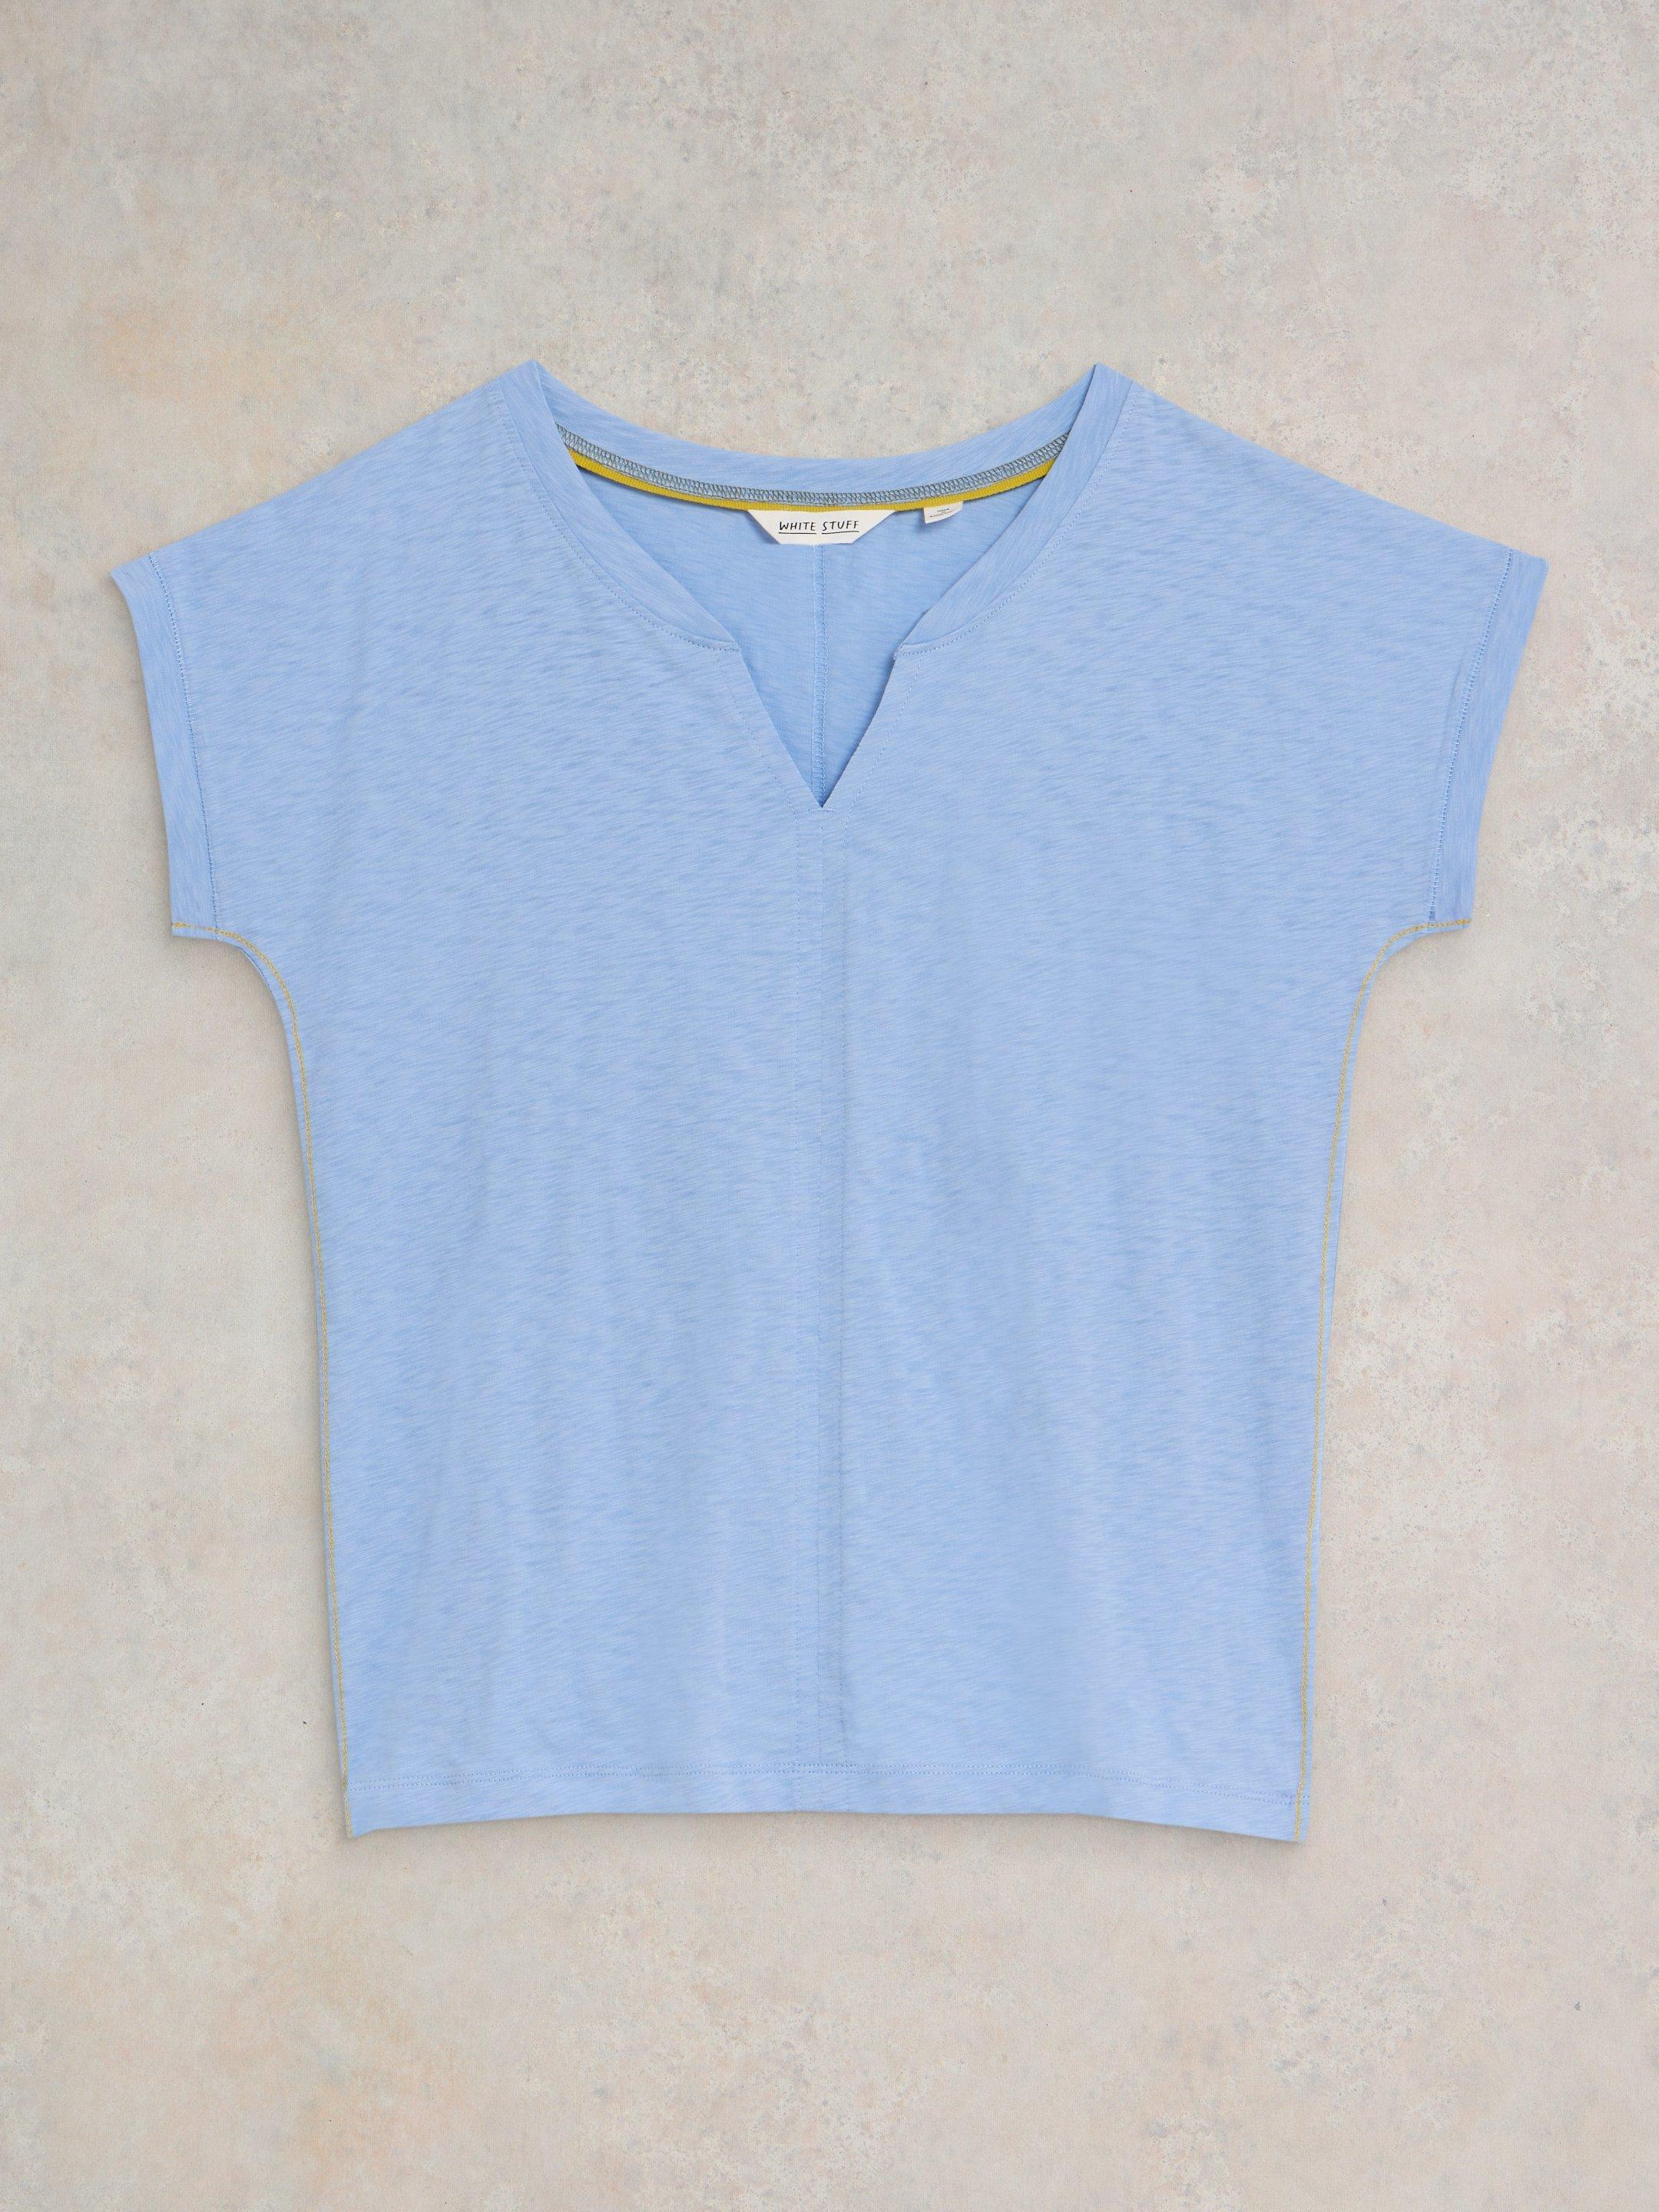 NELLY NOTCH NECK COTTON TEE in LGT BLUE - FLAT FRONT